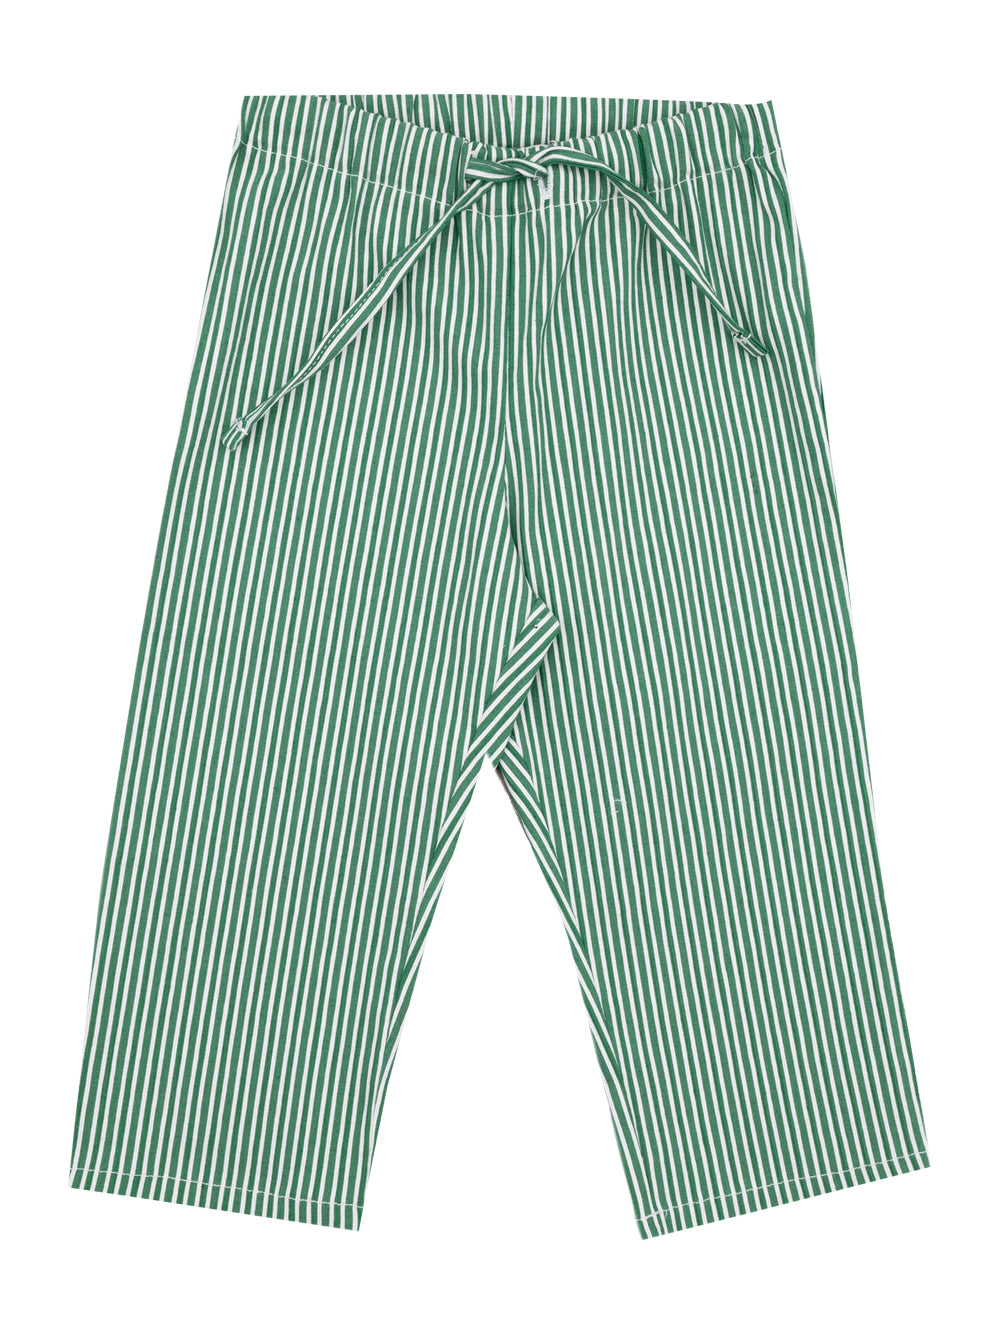 PREORDER: Green Striped Trousers